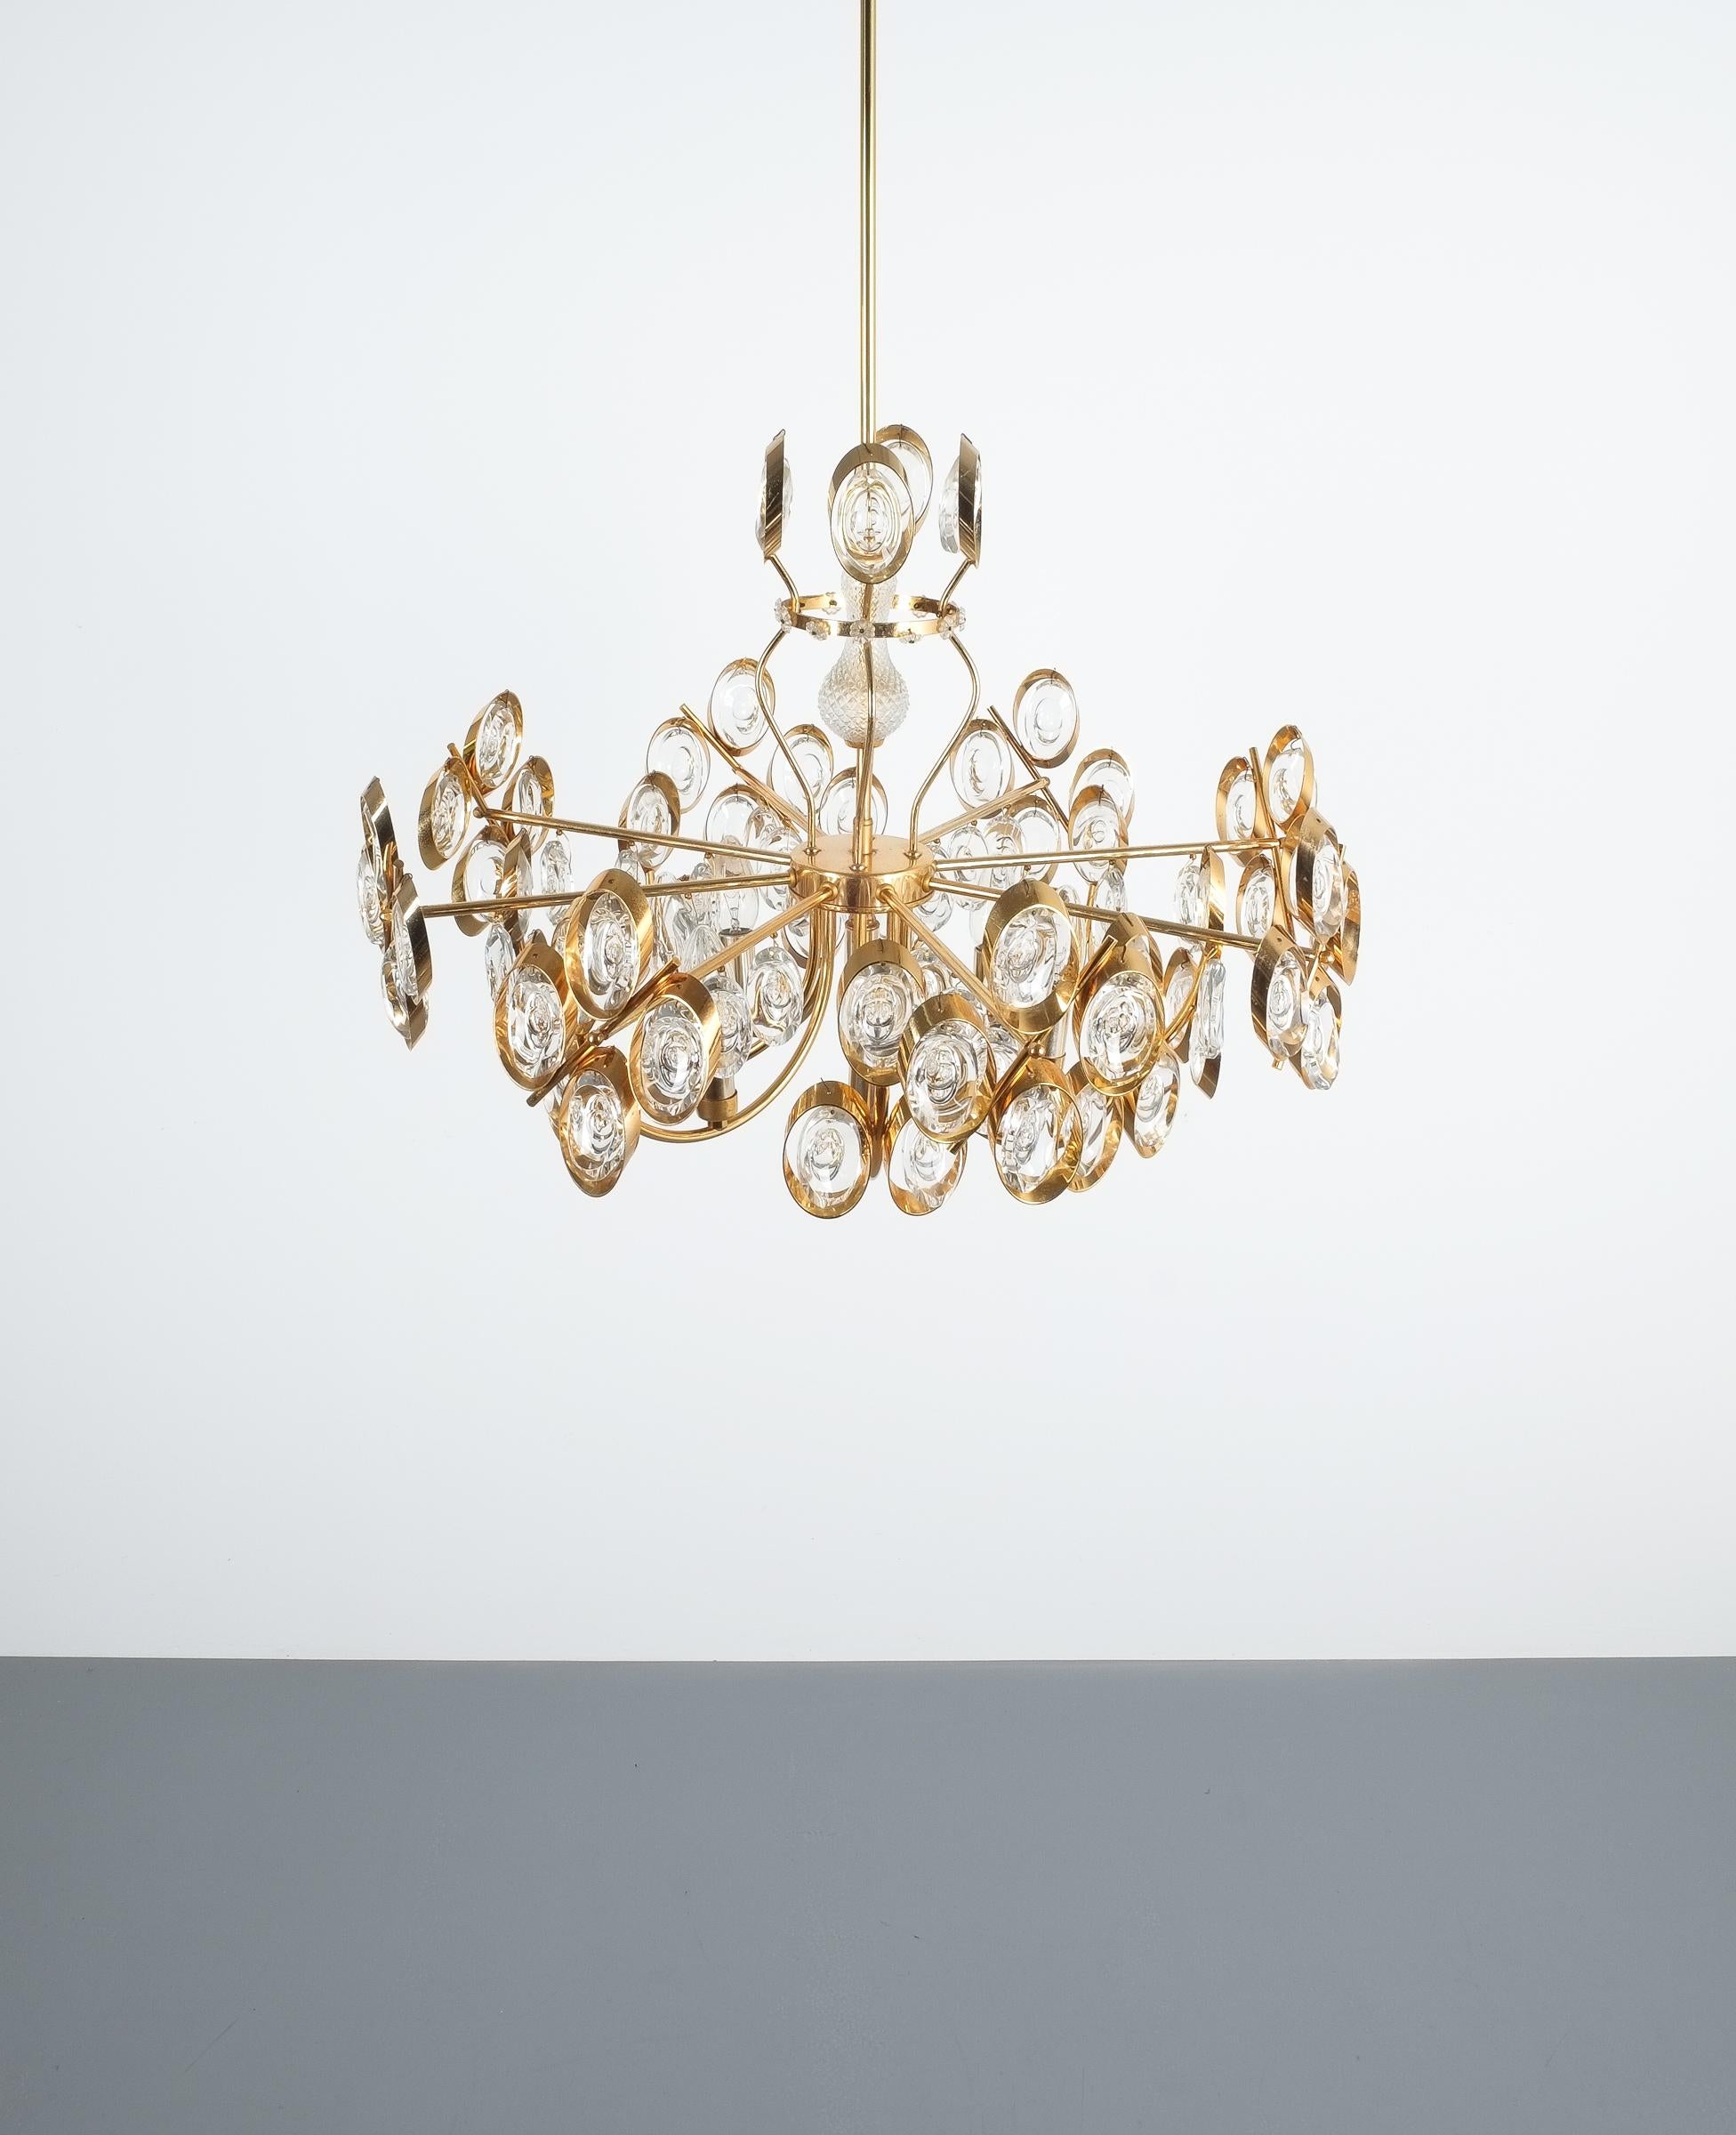 German Gilt Brass and Glass Chandelier Lamp by Palwa, 1970 For Sale